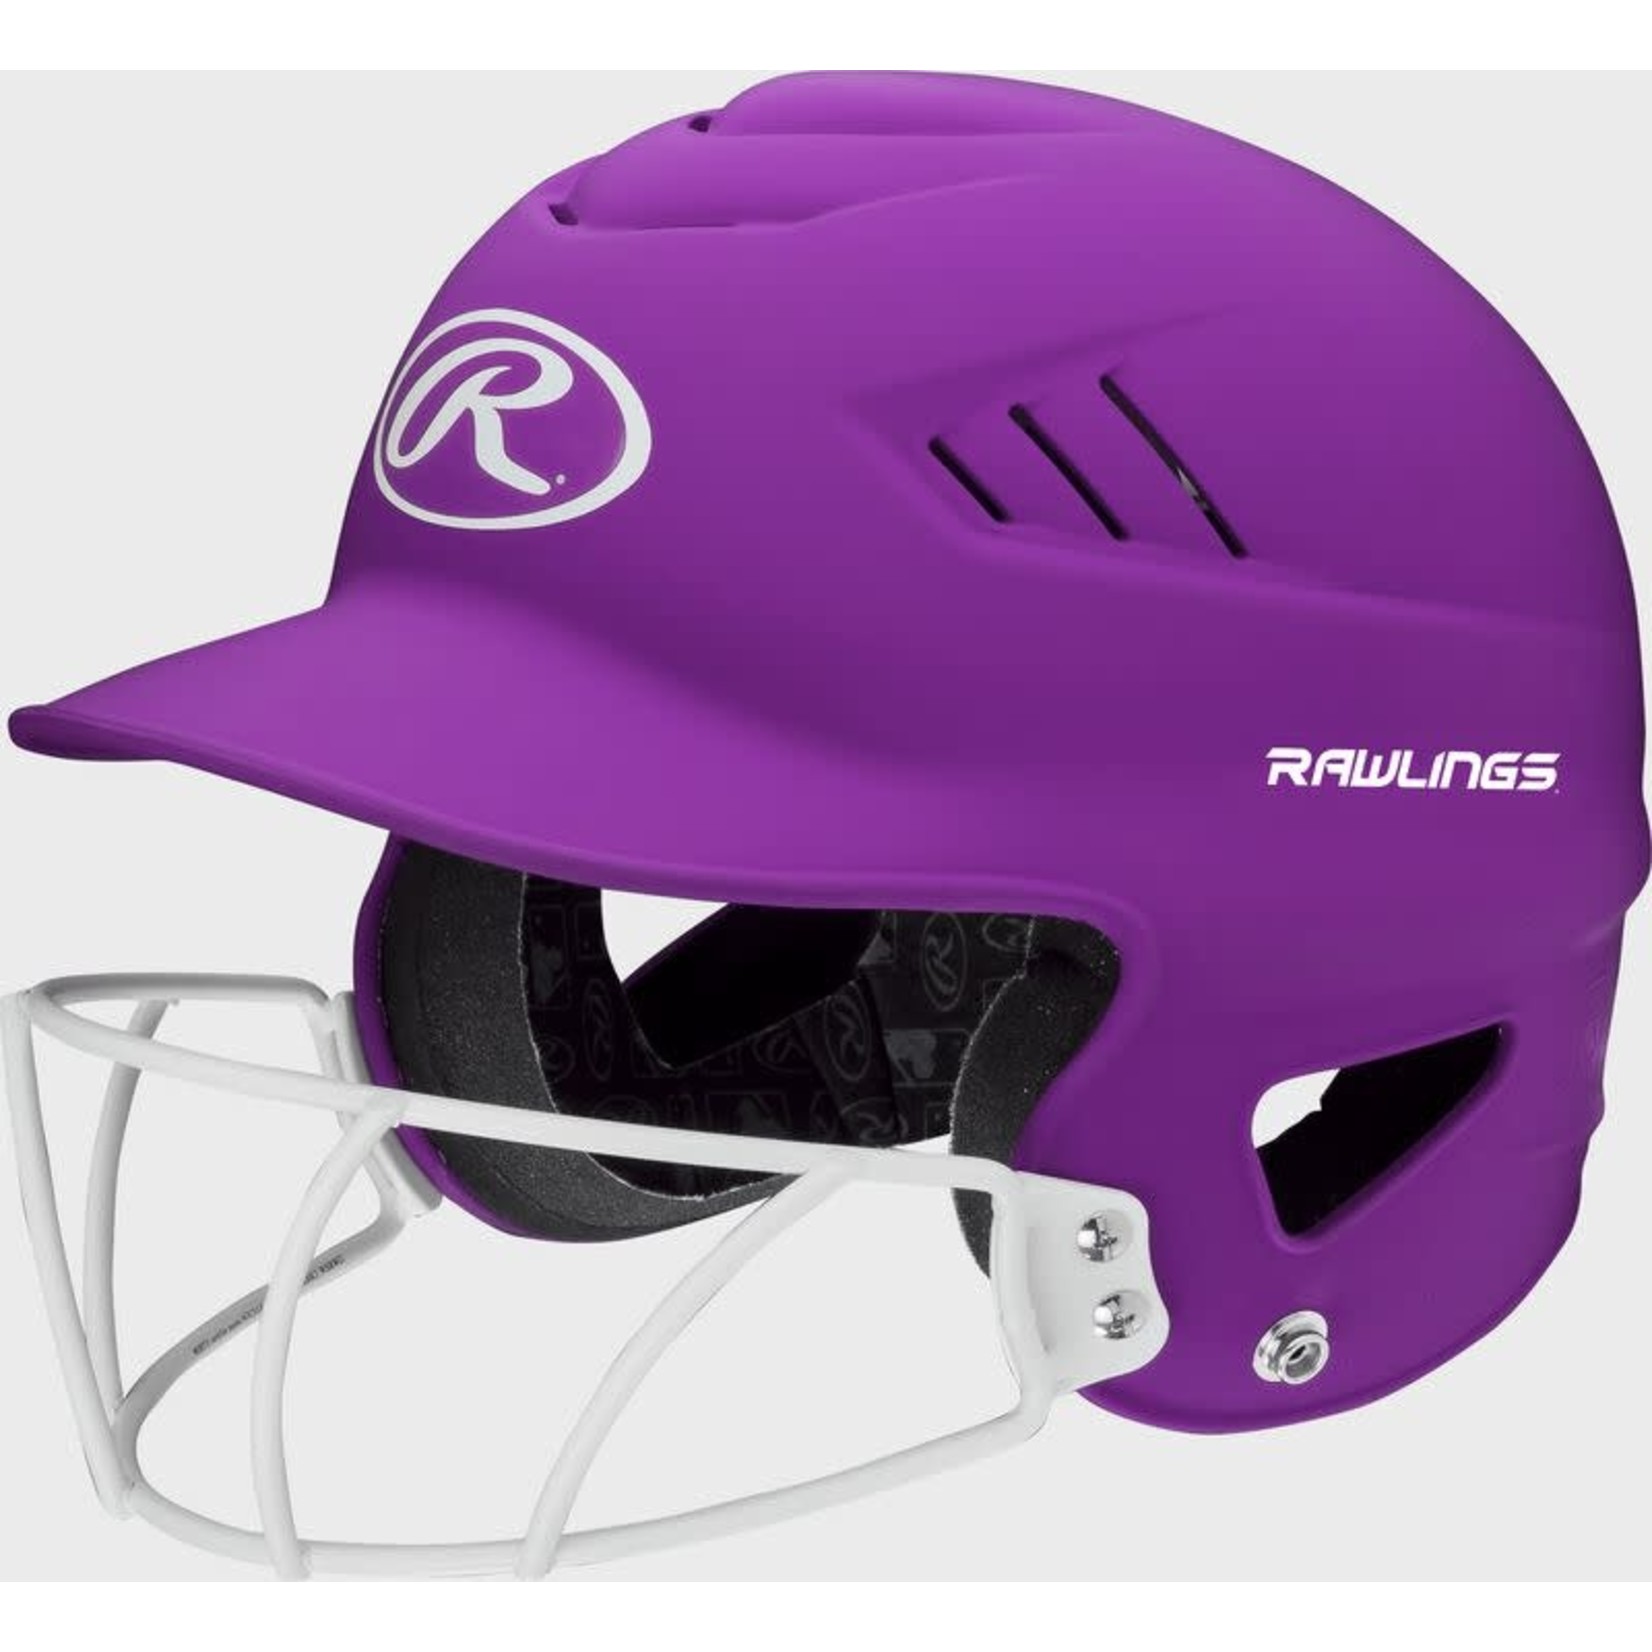 Rawlings Coolflo Batting Helmet with Face Guard